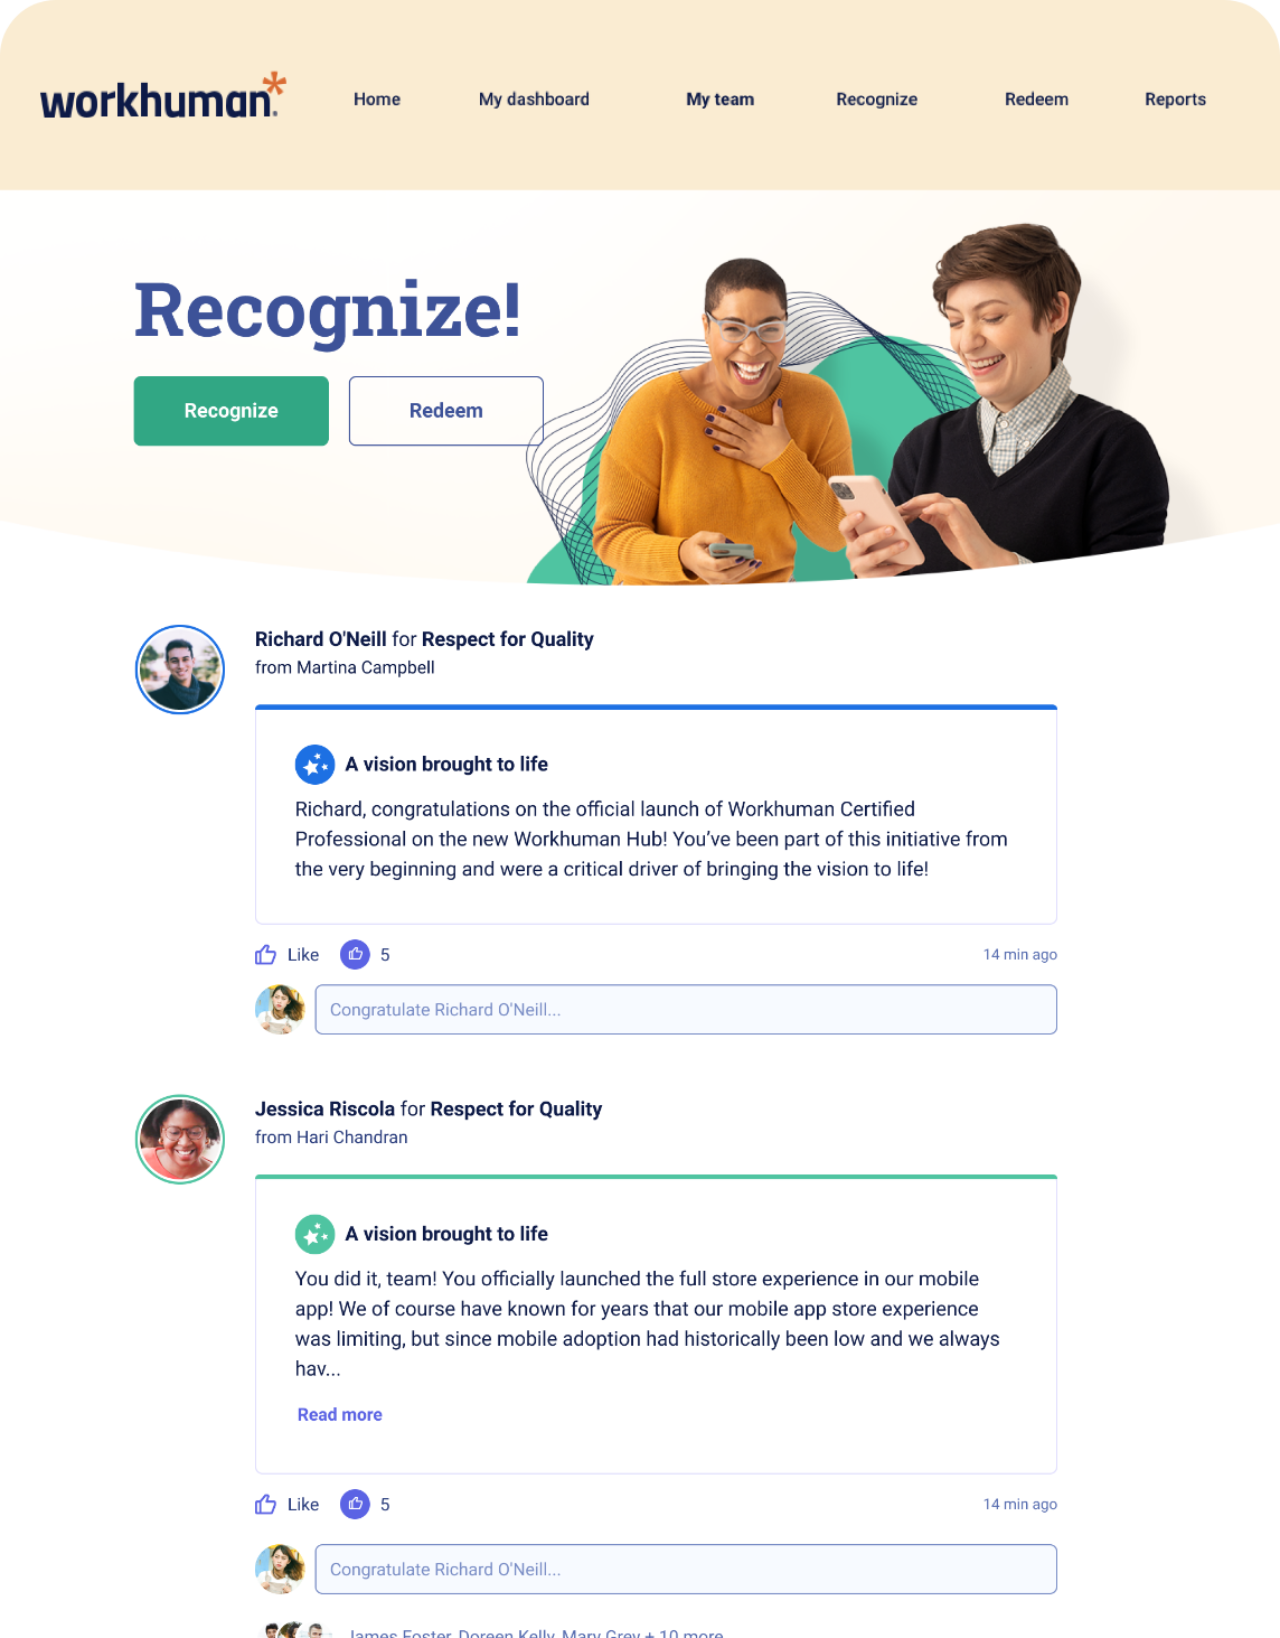 Employees can easily recognize and reward each other for doing great work by nominating them for an award, customizing the message and level, and sending it to a manager for approval. Everyone is just a few clicks away from making someone’s day.